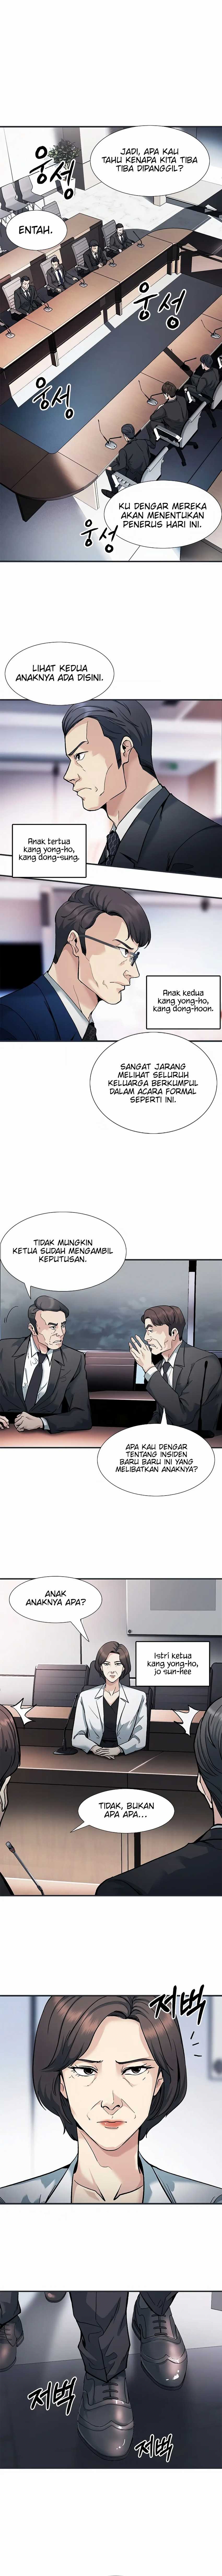 Chairman Kang, The New Employee Chapter 01